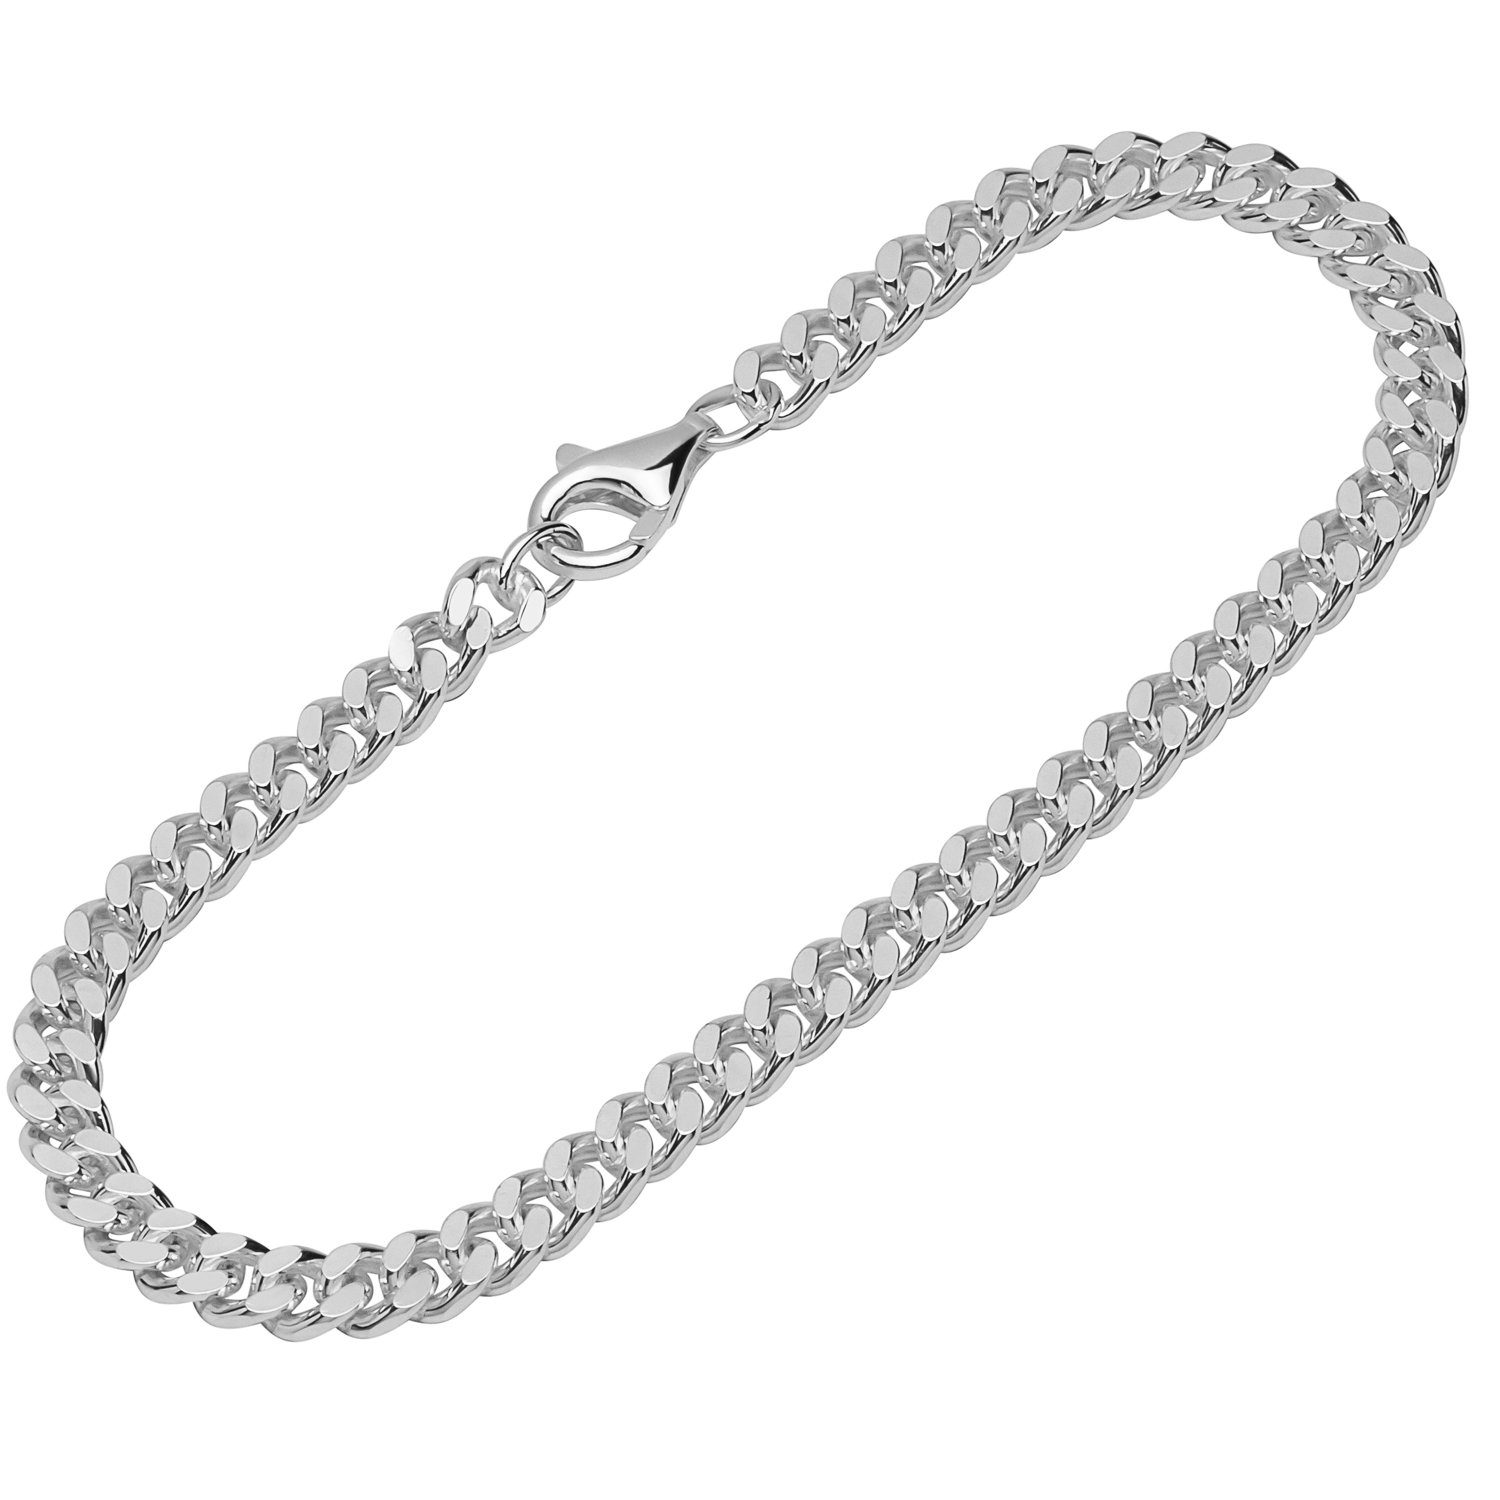 NKlaus Silberarmband Armband 925 Sterling Silber 19cm Panzerkette 2 fac (1 Stück), Made in Germany